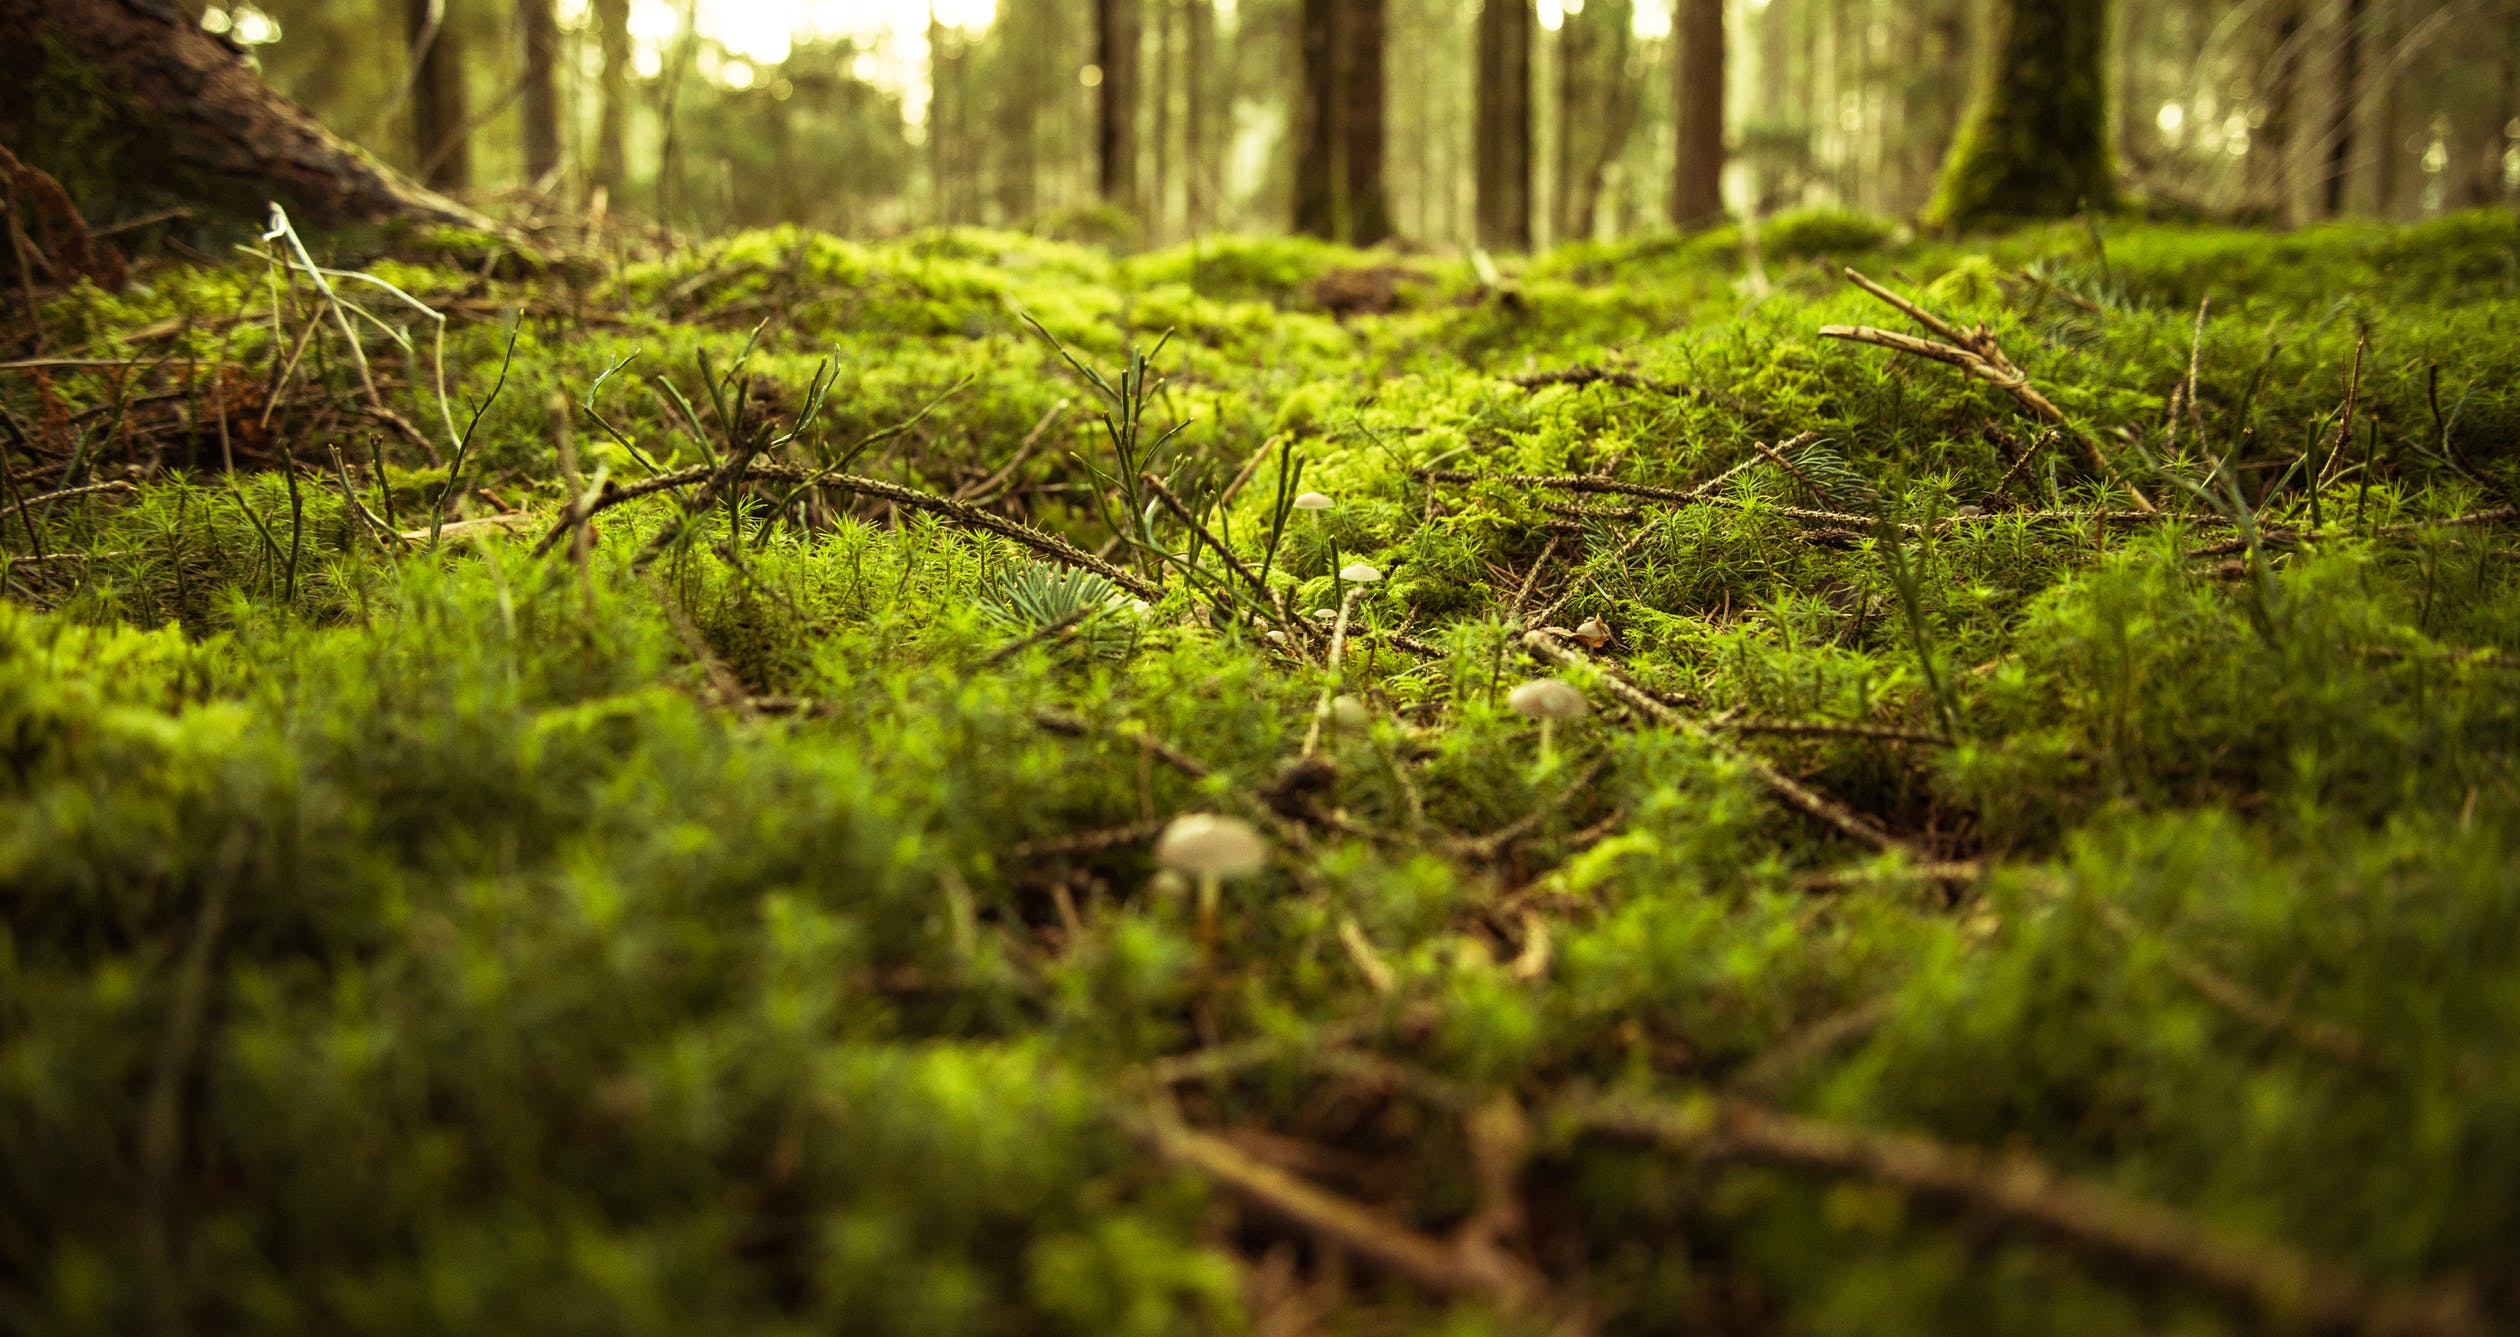 A moss-covered forest